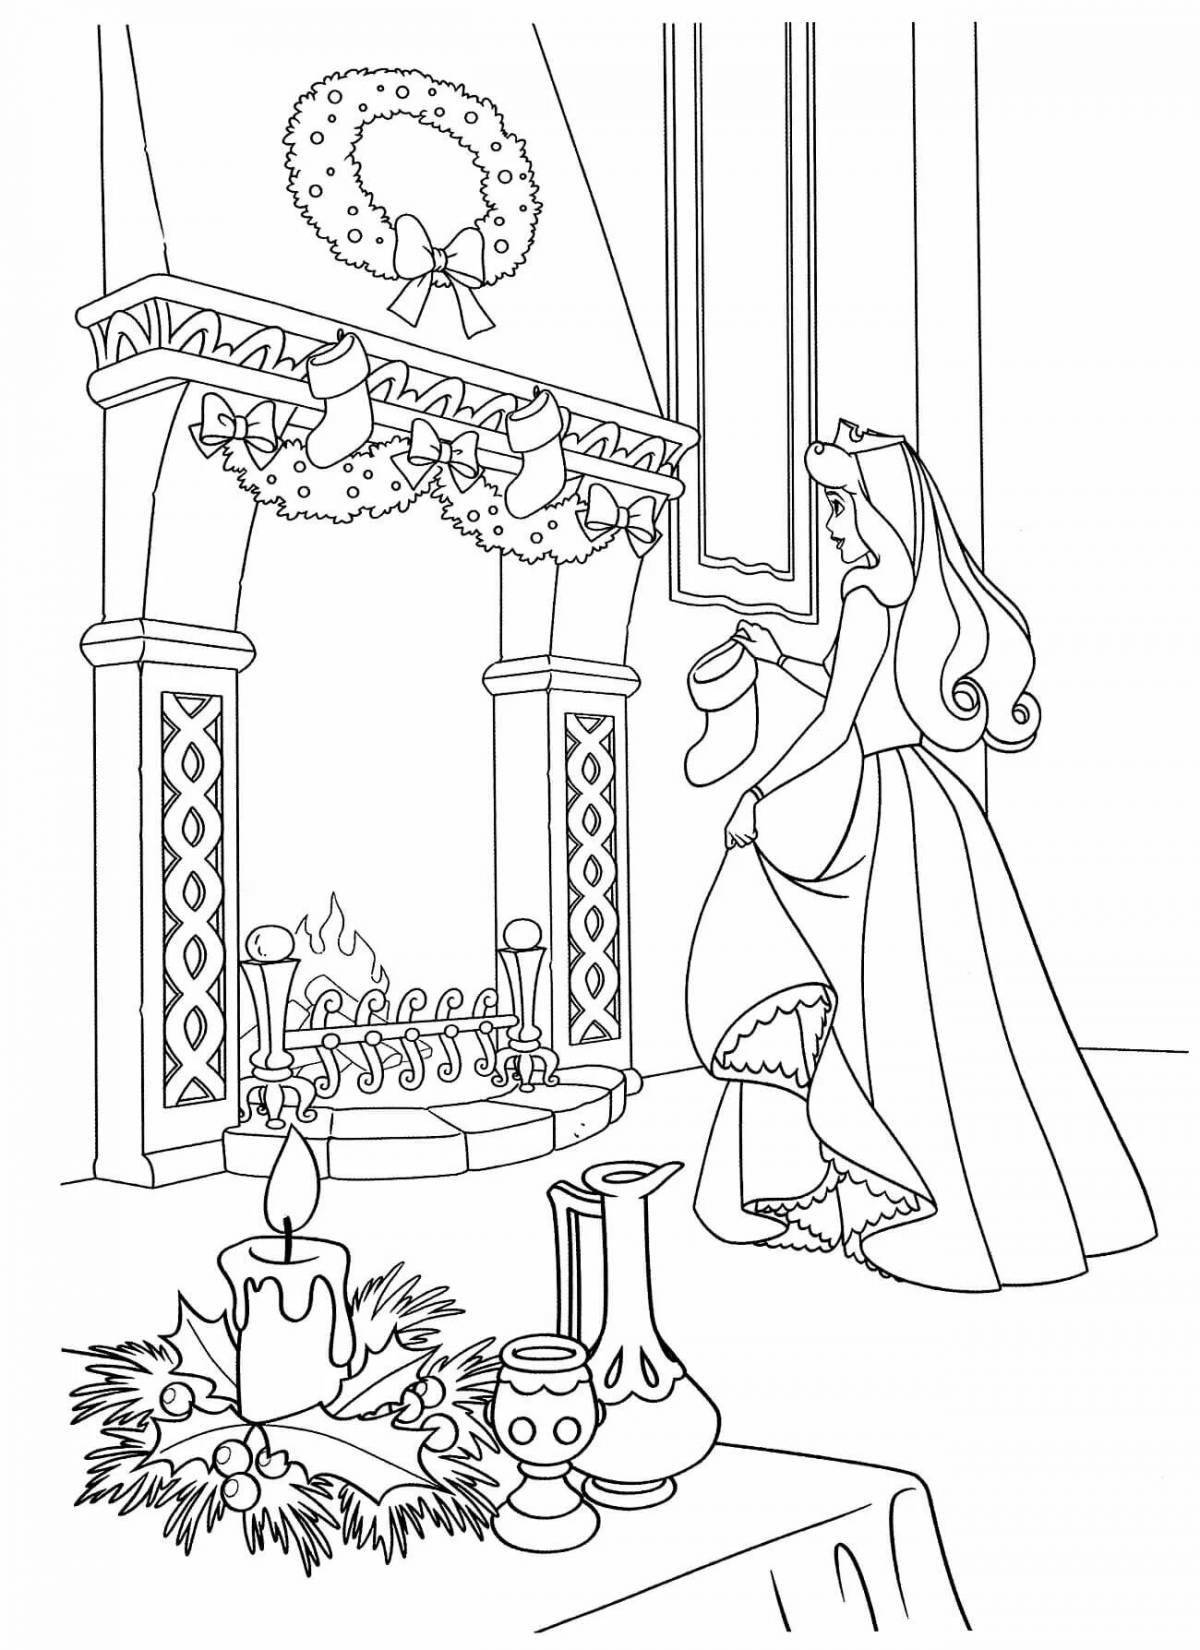 Great new year castle coloring book